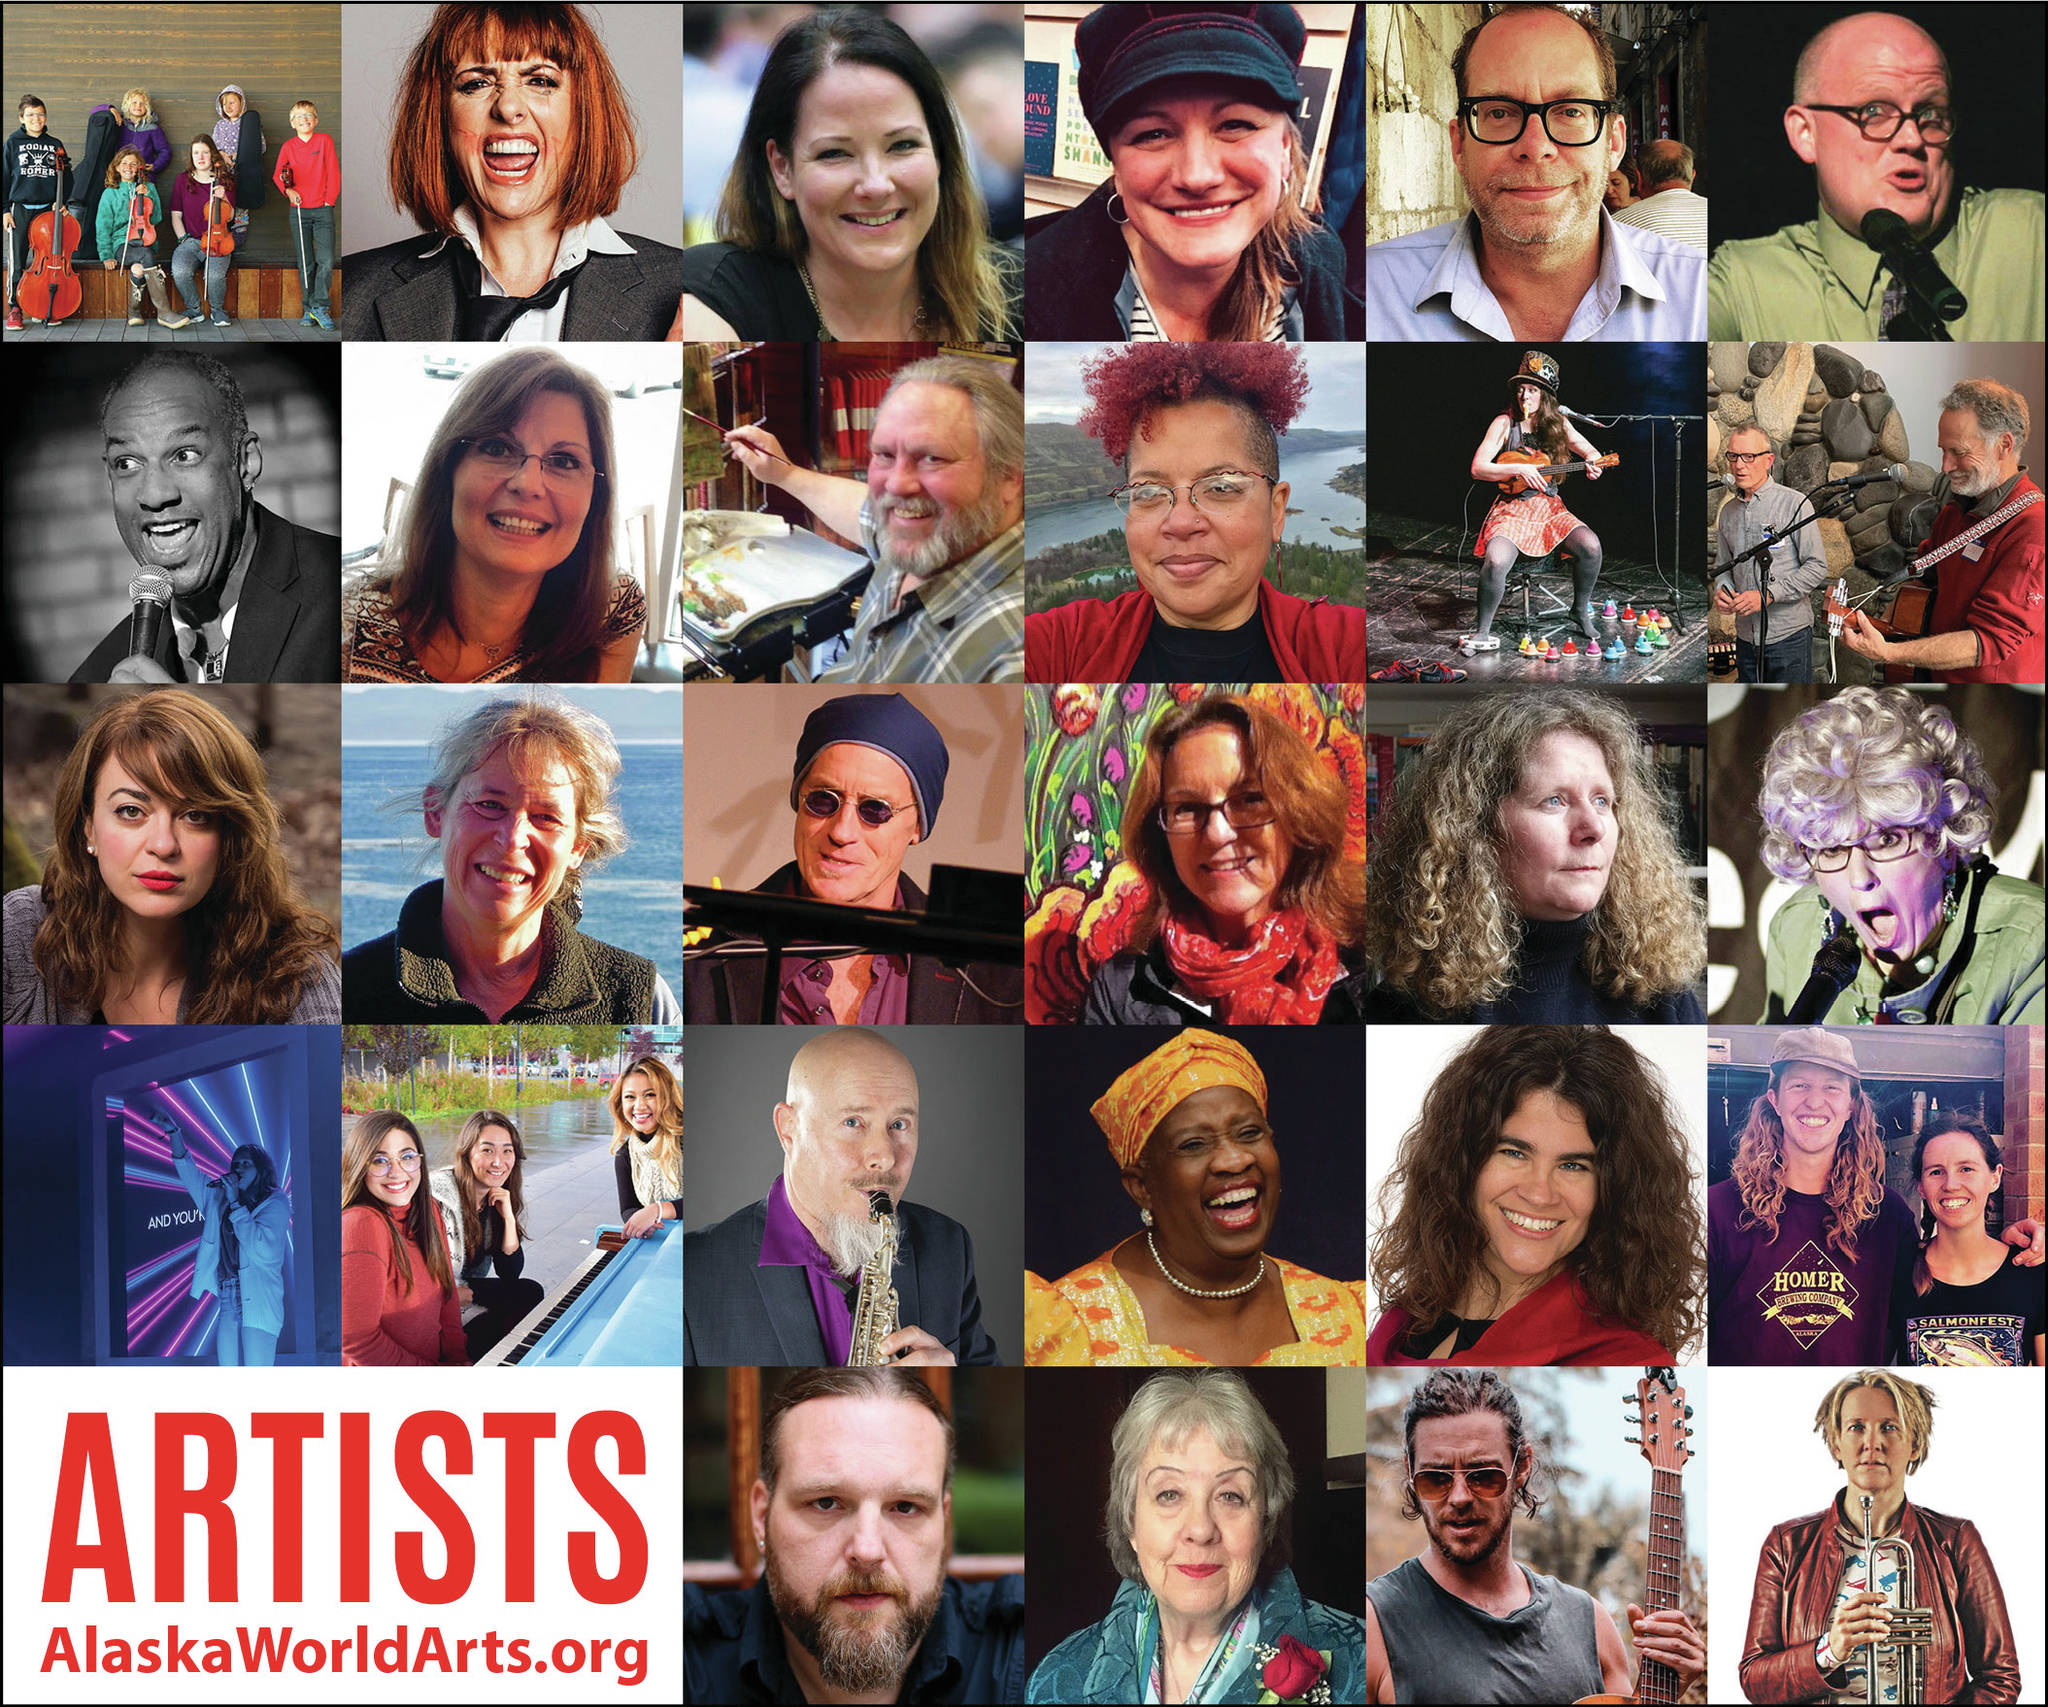 A poster for the Alaska World Arts Festival shows some of the musicians, writers, poets and performers who will be appearing both live and virtually during the festival held Sept. 11-24 in Homer, Alaska, and virtually. (Photo courtesy Alaska World Arts Festival)